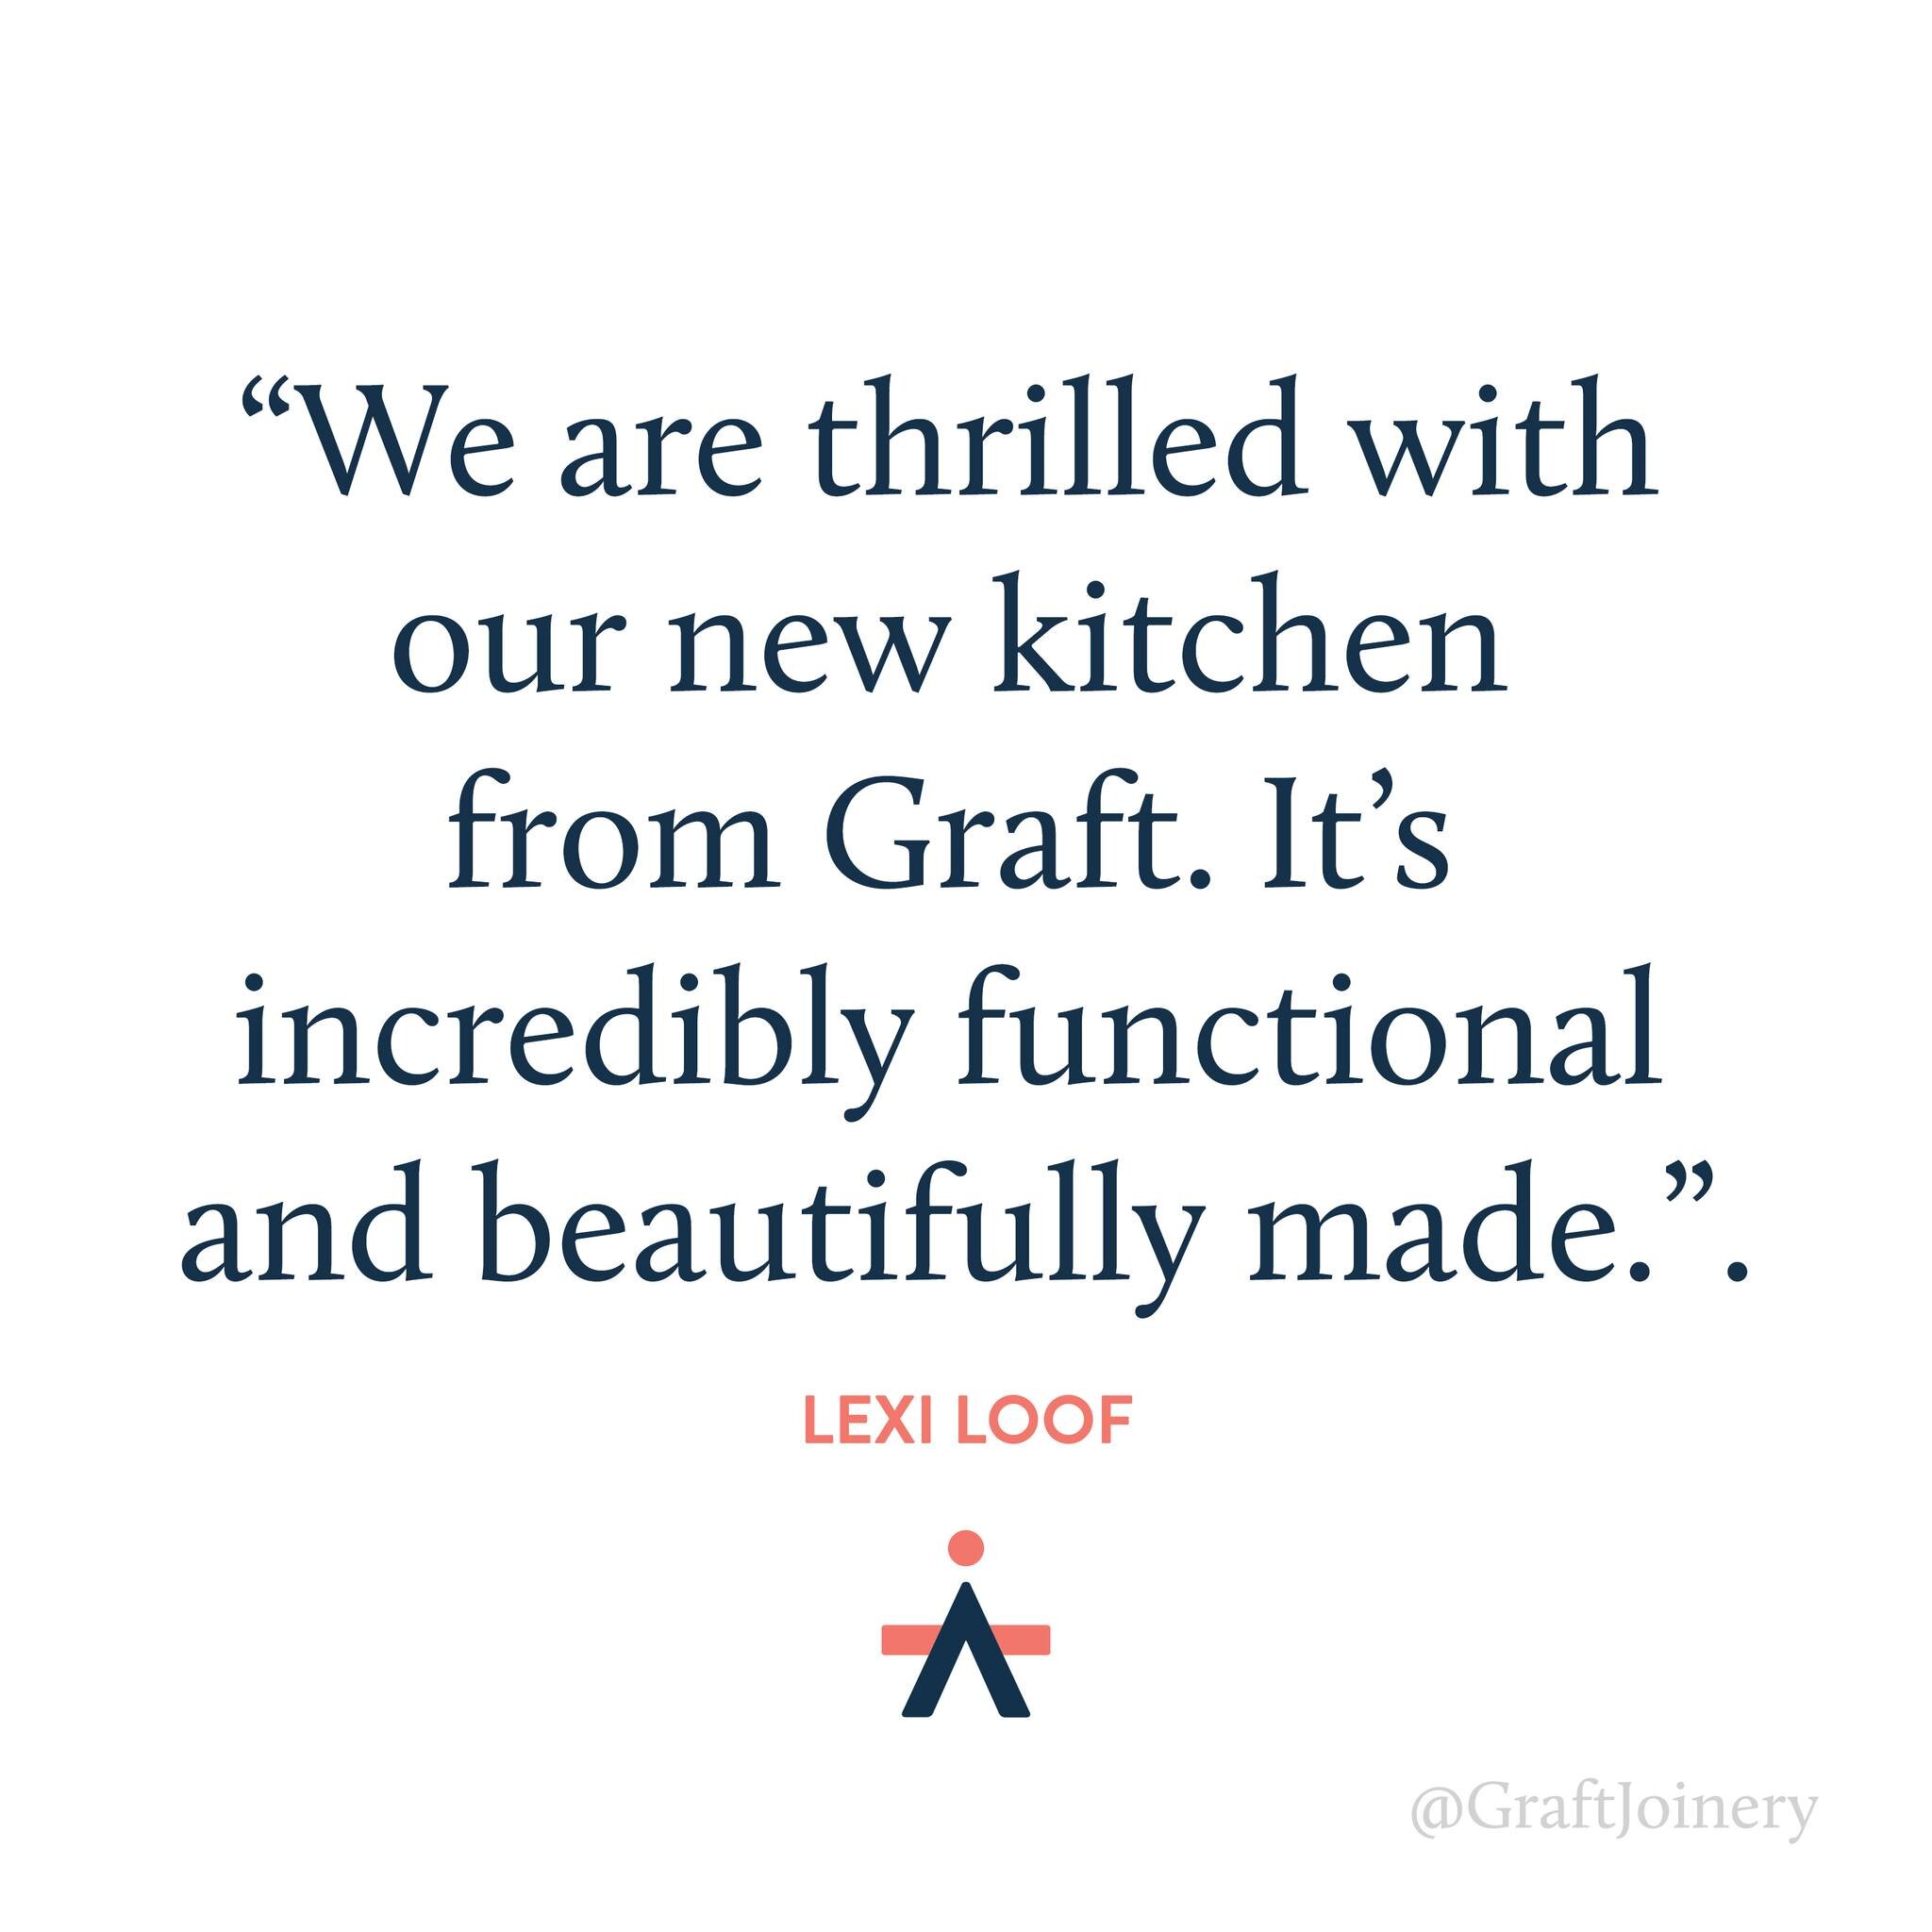 Turning dreams into reality, one kitchen at a time. Our clients' kind words say it all! 
 
#KitchenGoals #HappyClients #DreamKitchen #graftjoinery #lovetauponz